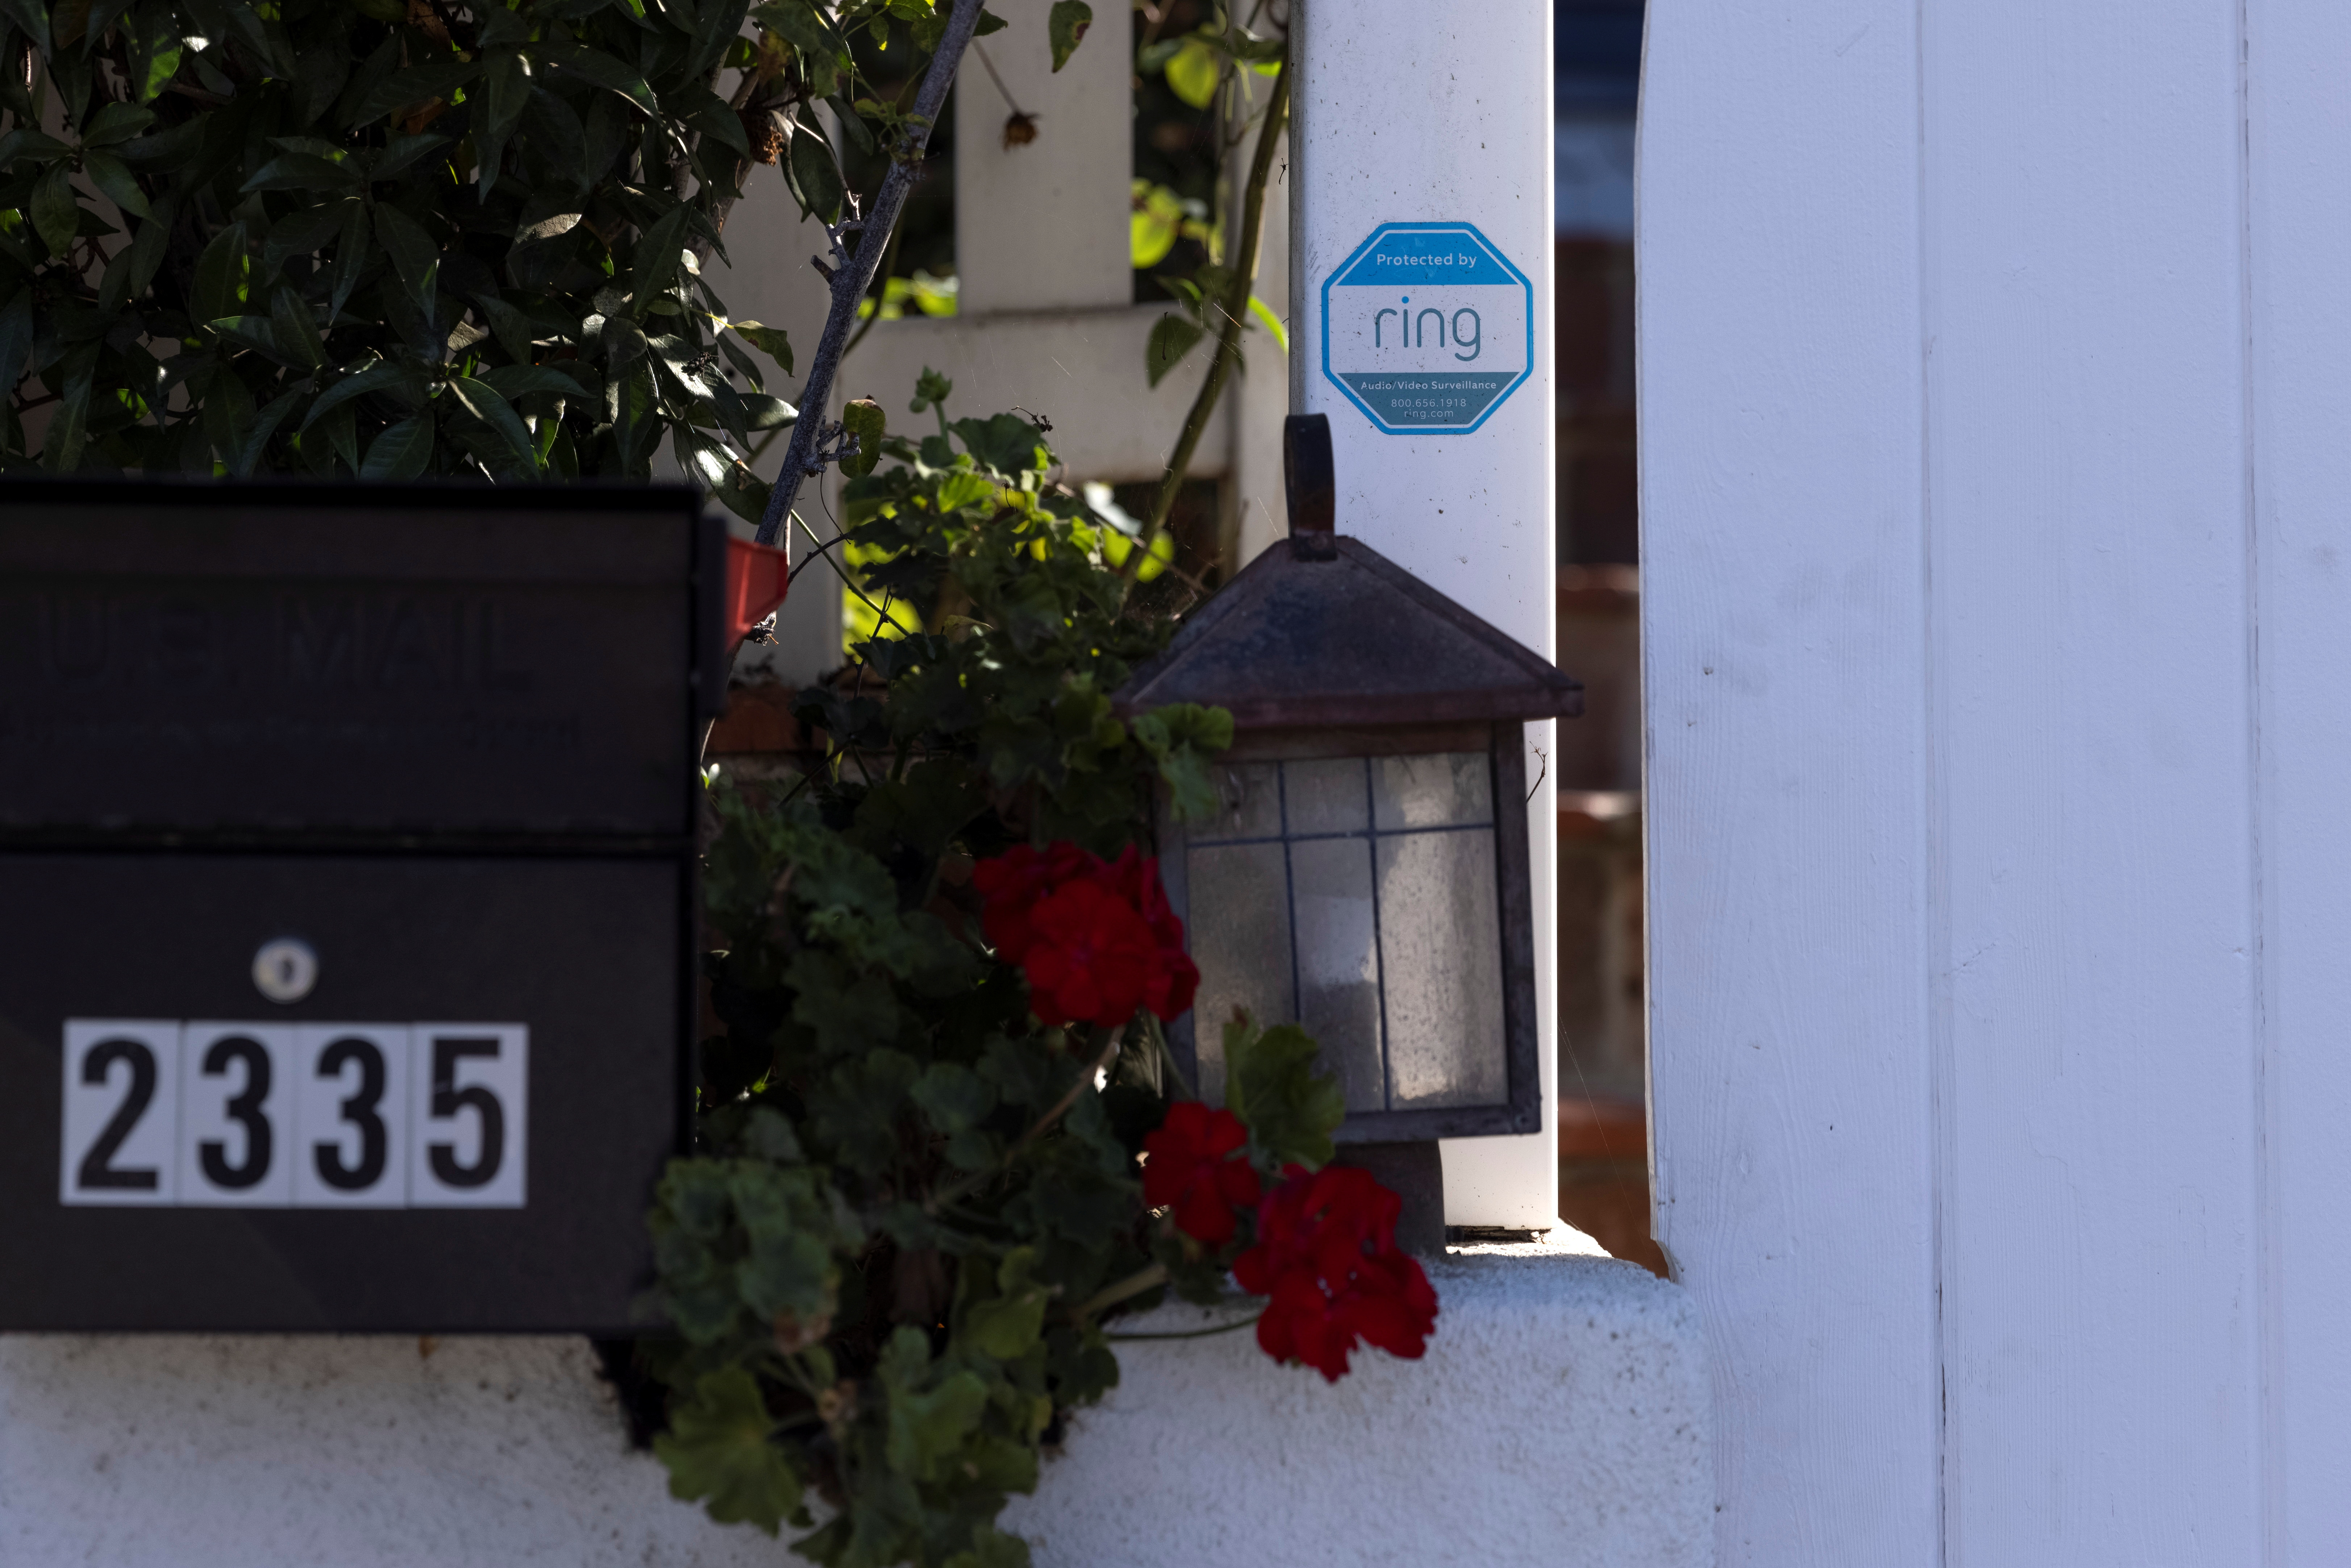 An Amazon Ring sign is shown as a security warning at the entrance to a residential home in Encinitas, California